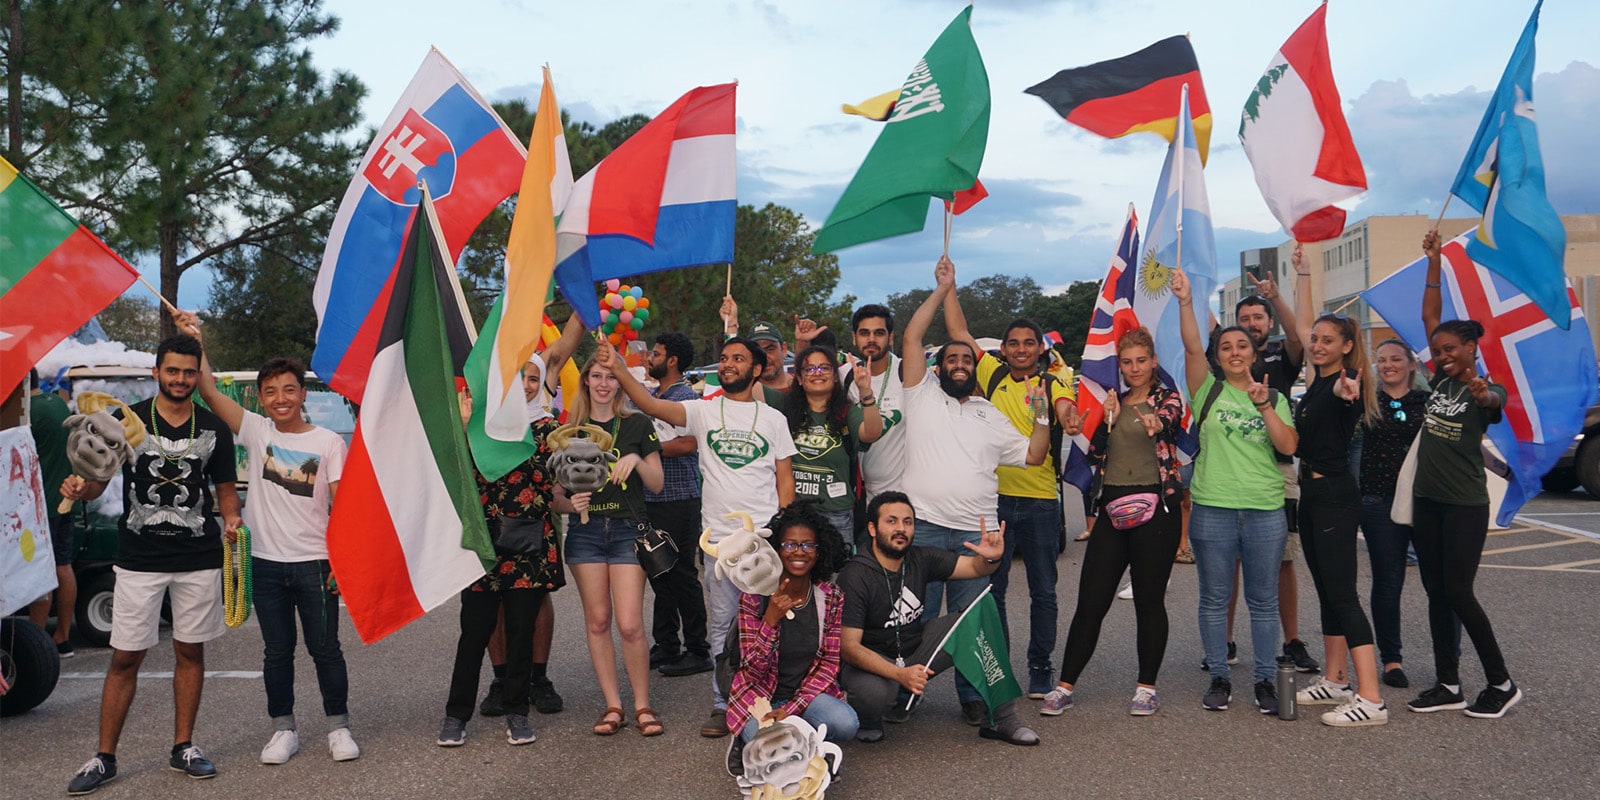 USF World students pose for a photo with the flags of various countries